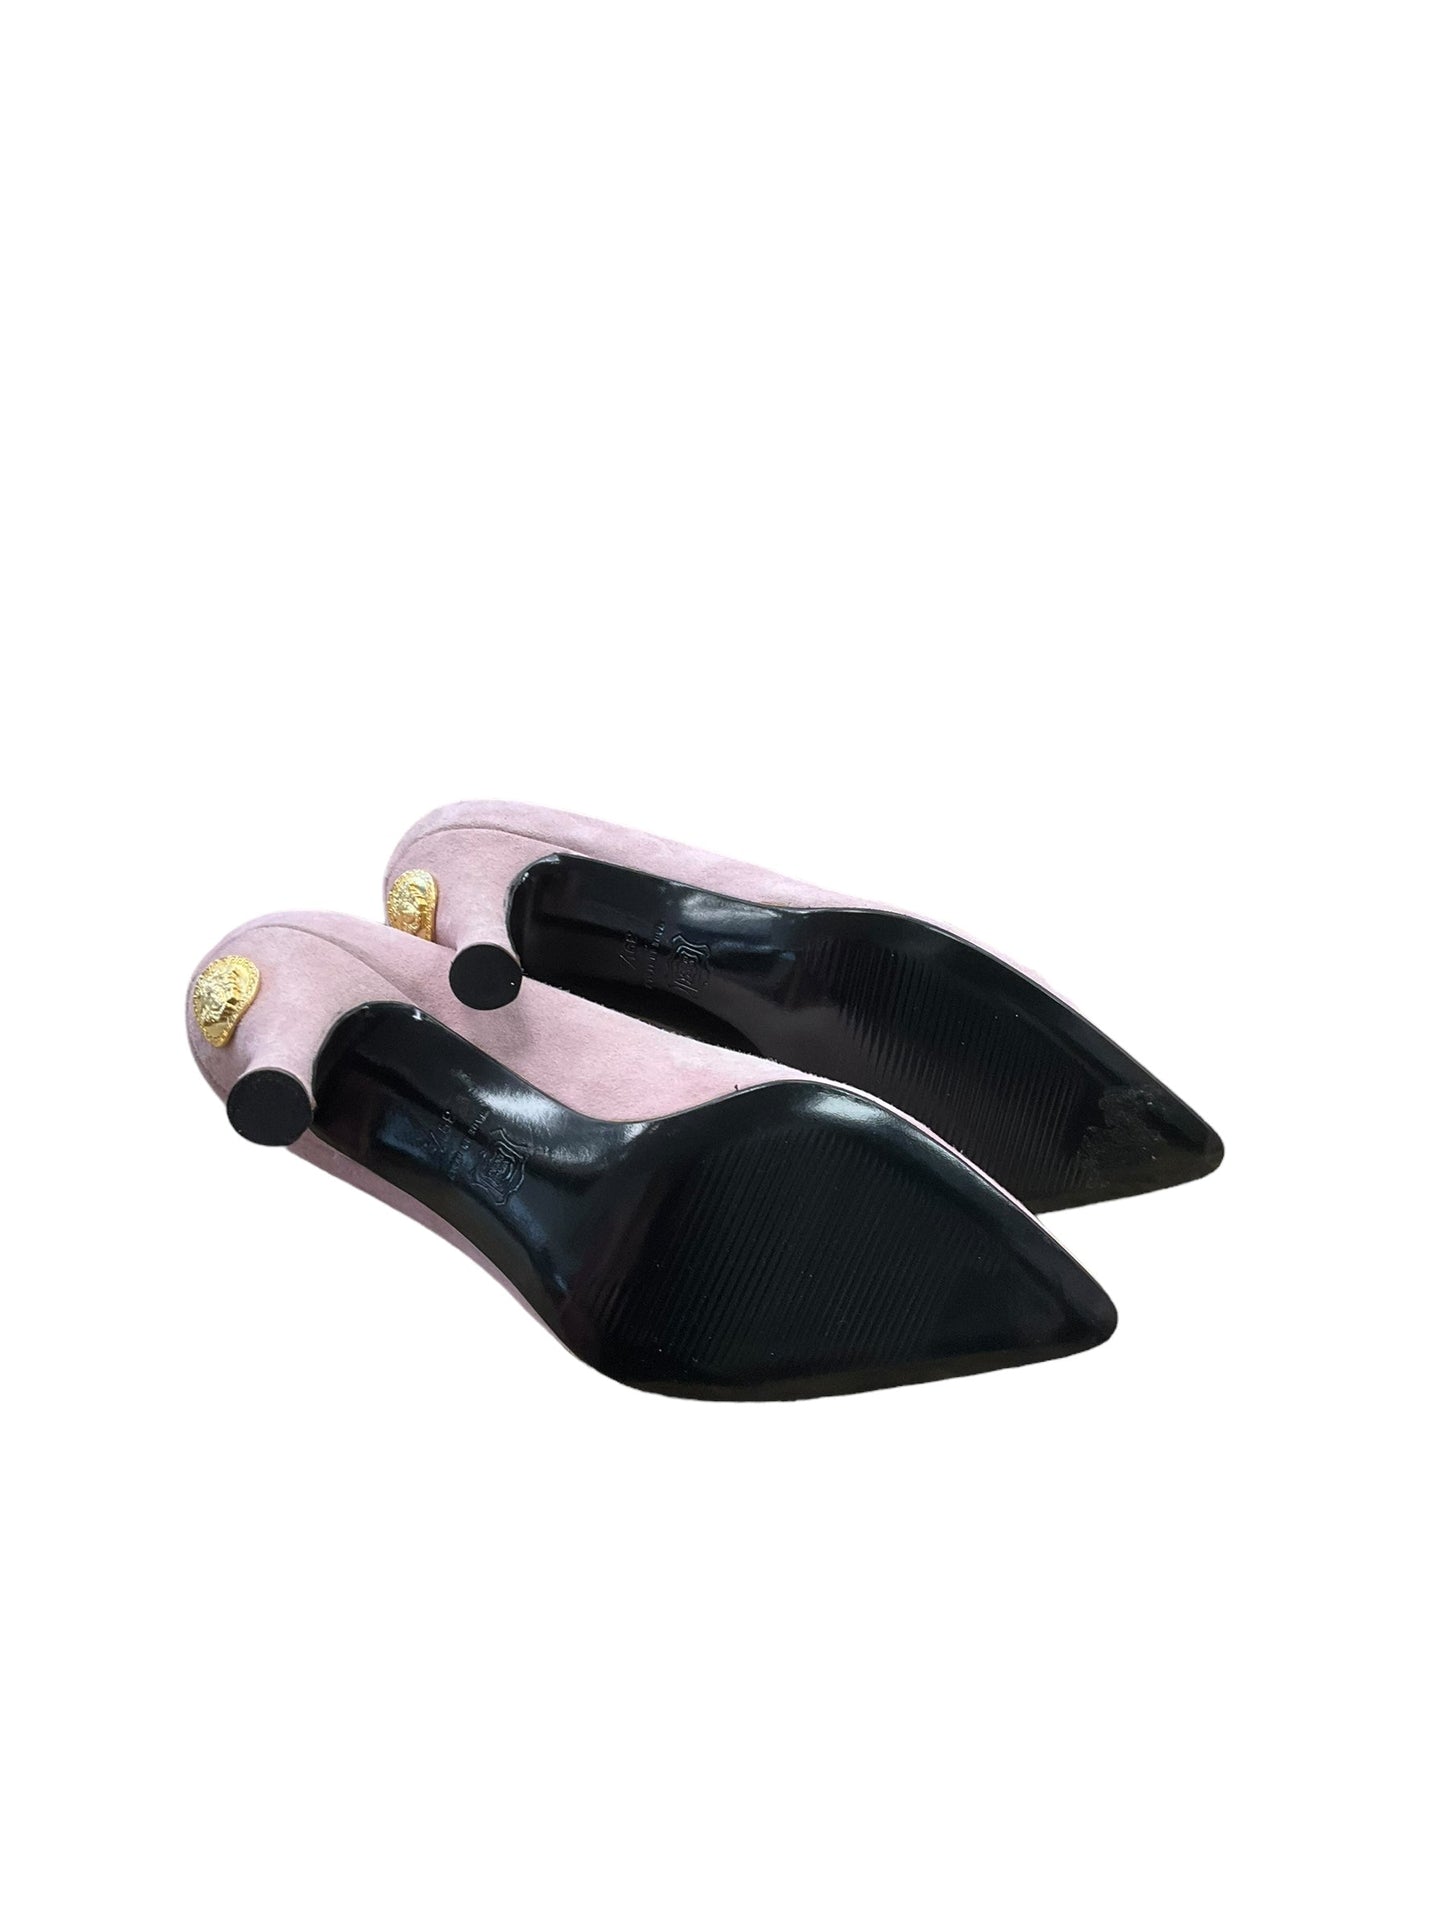 Pink Shoes Heels Stiletto Versace, Size 9